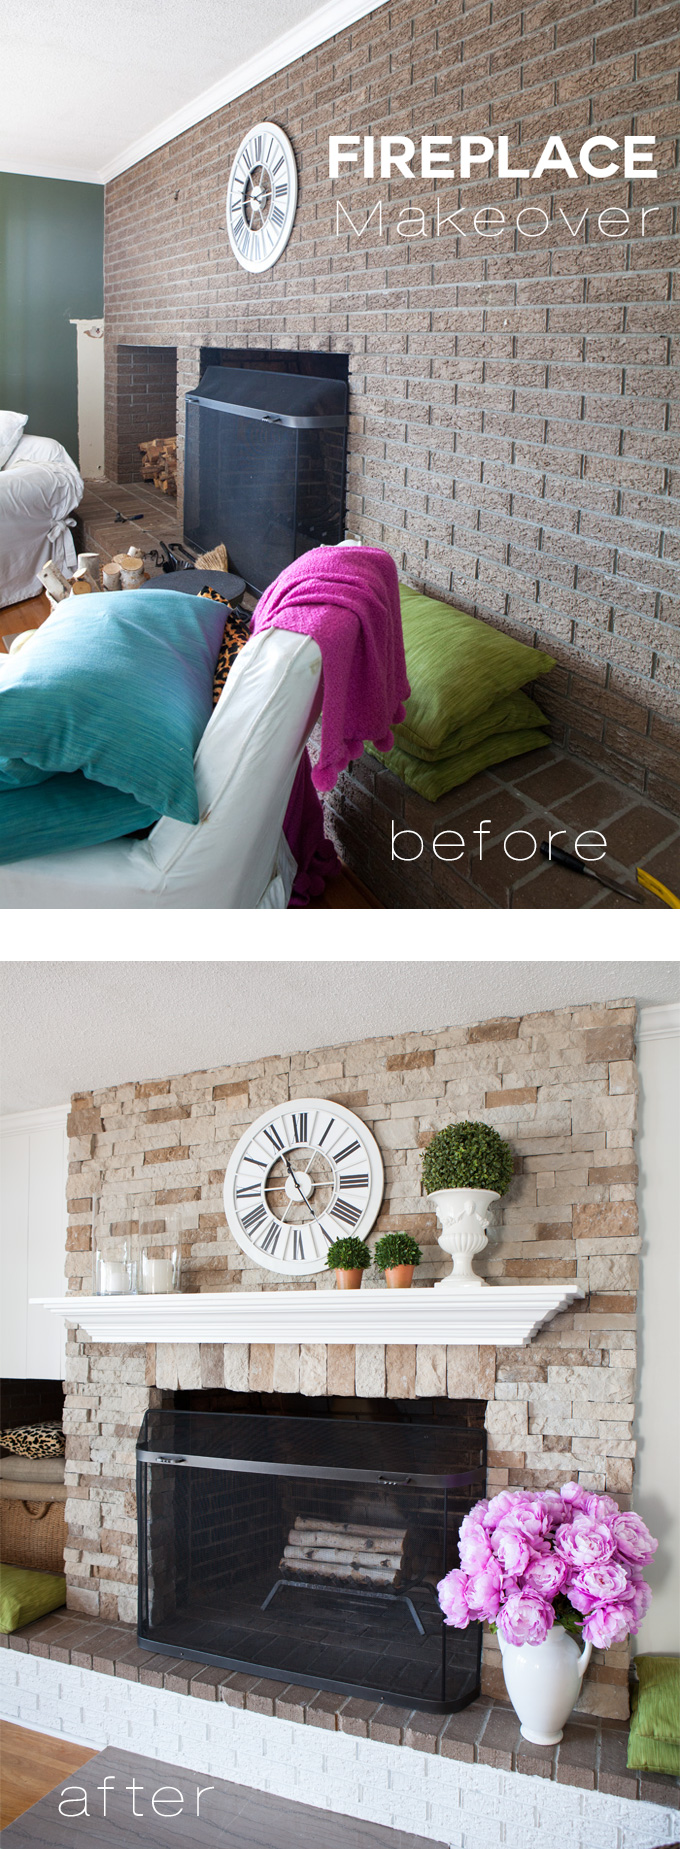 Fireplace mantel makeover